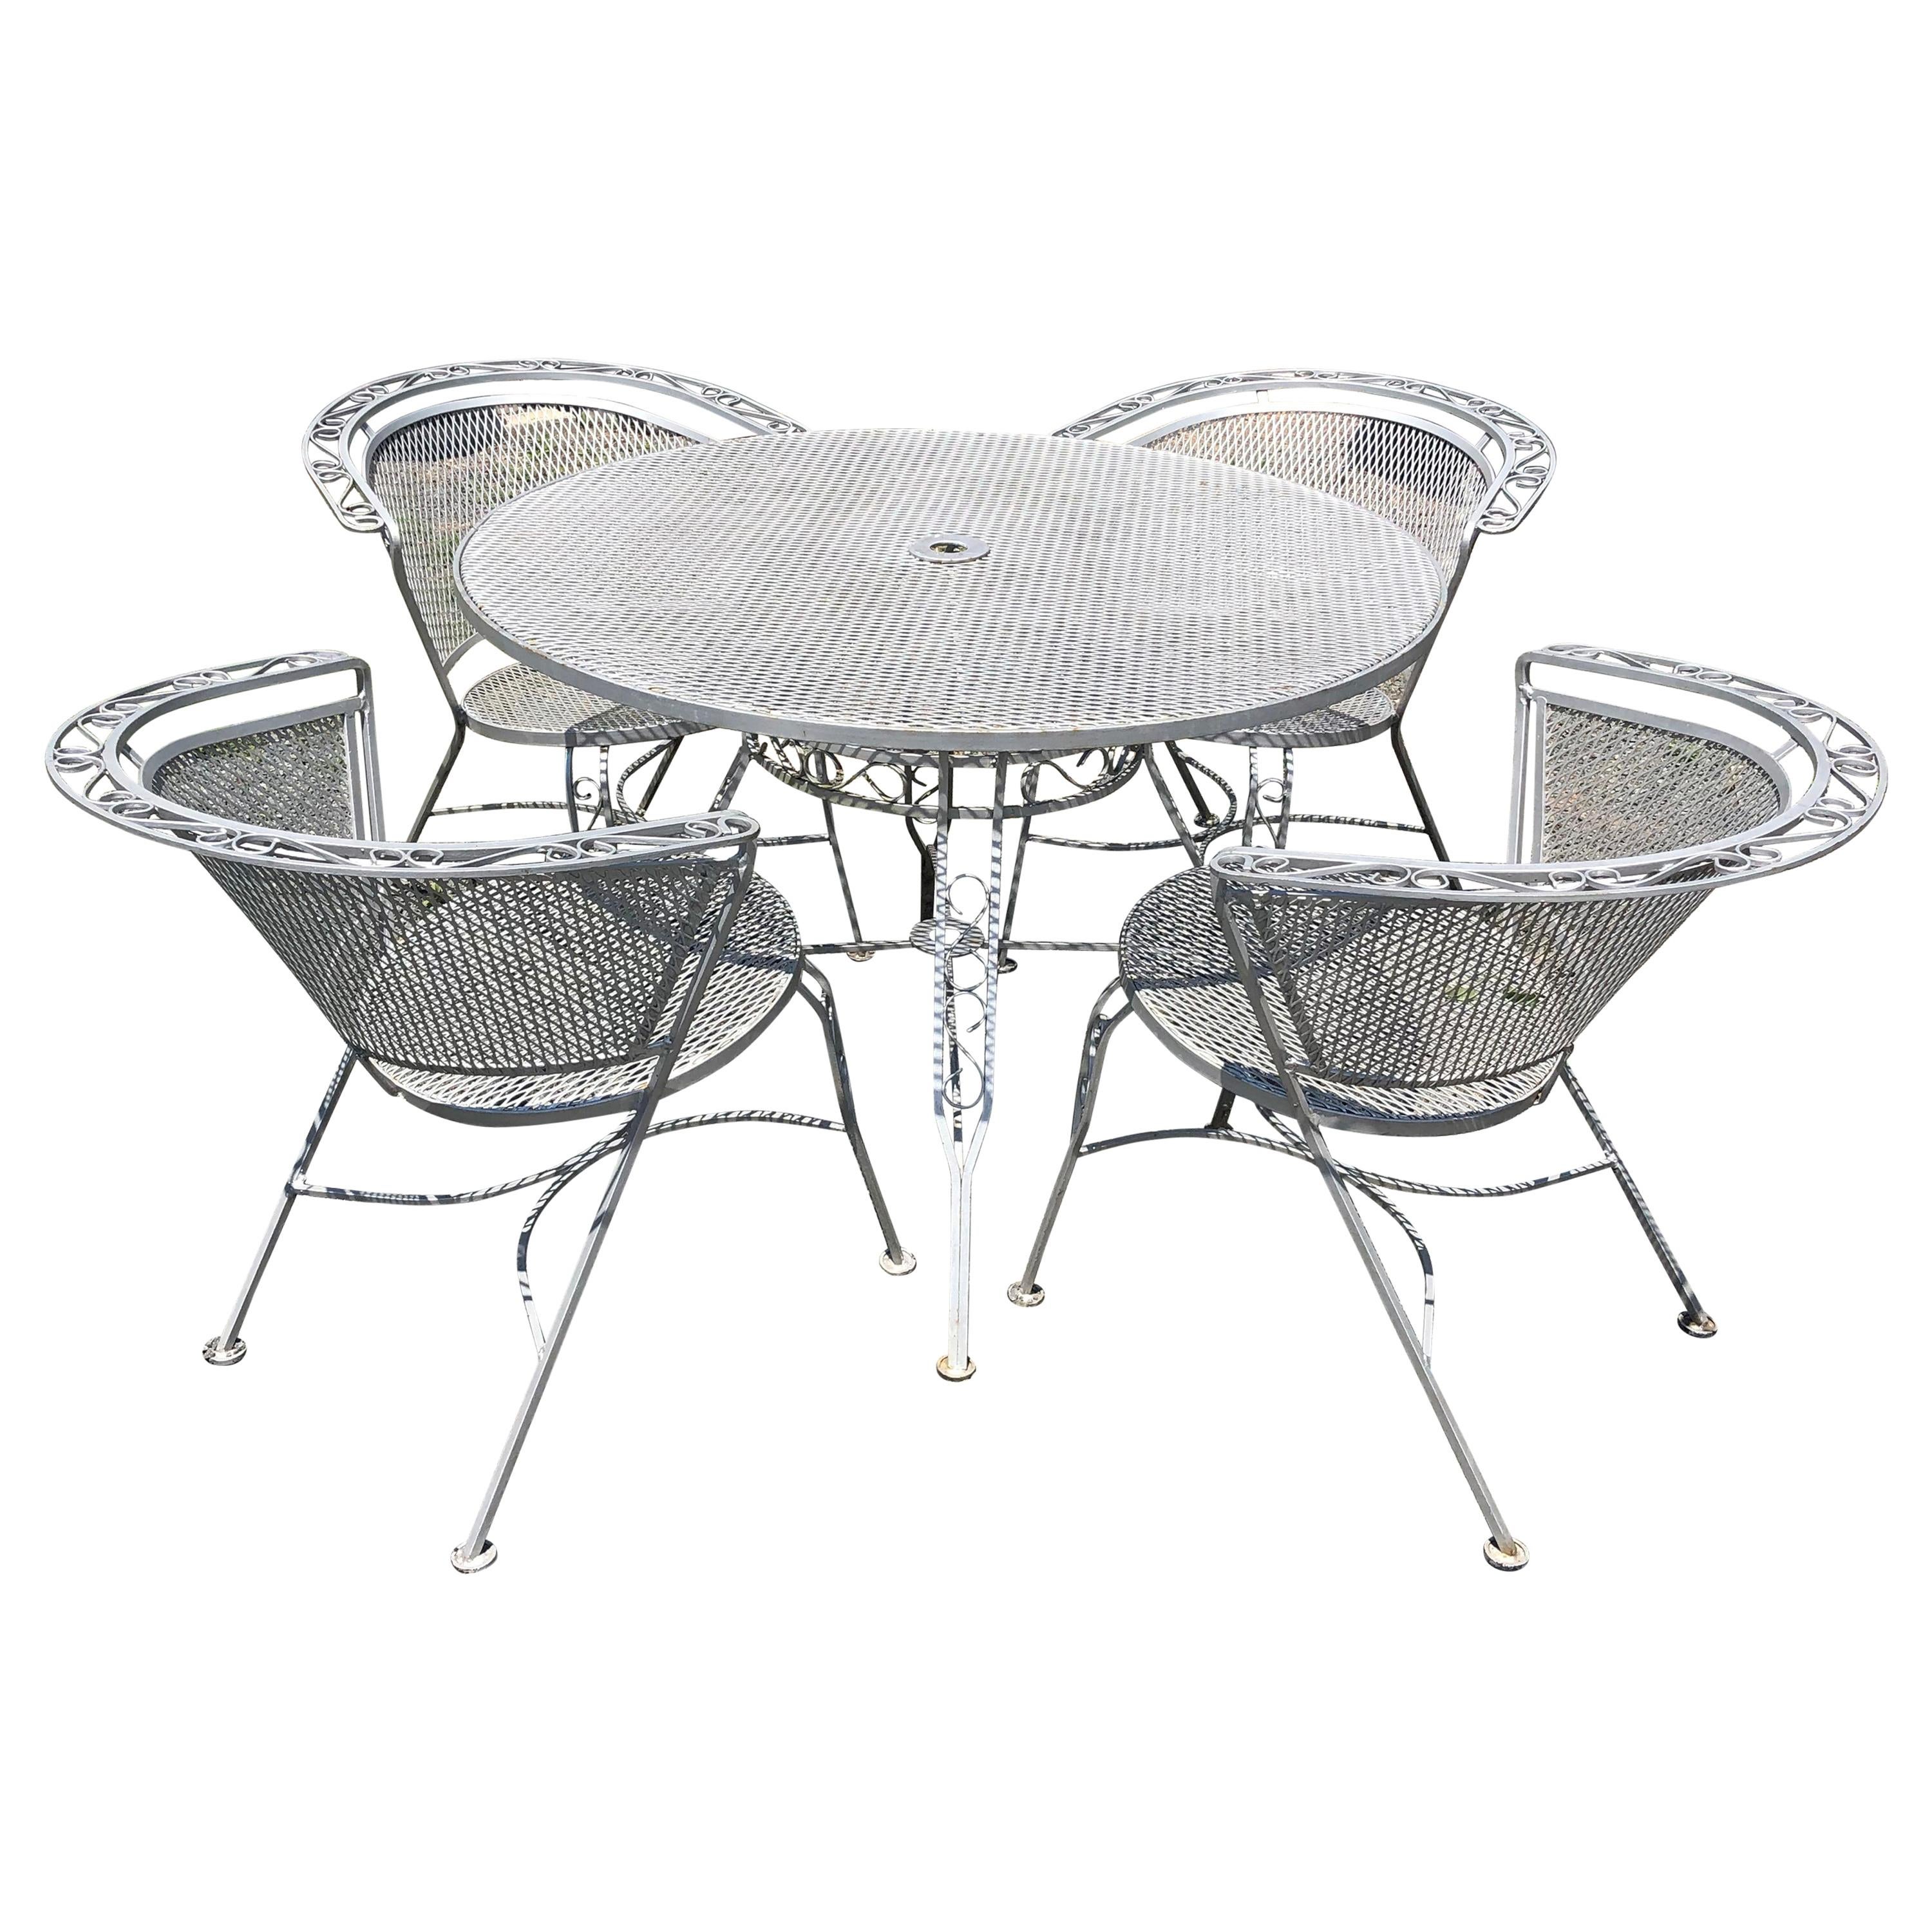 Vintage Woodard Midcentury Outdoor Dining Set with Round Table and 4 Chairs